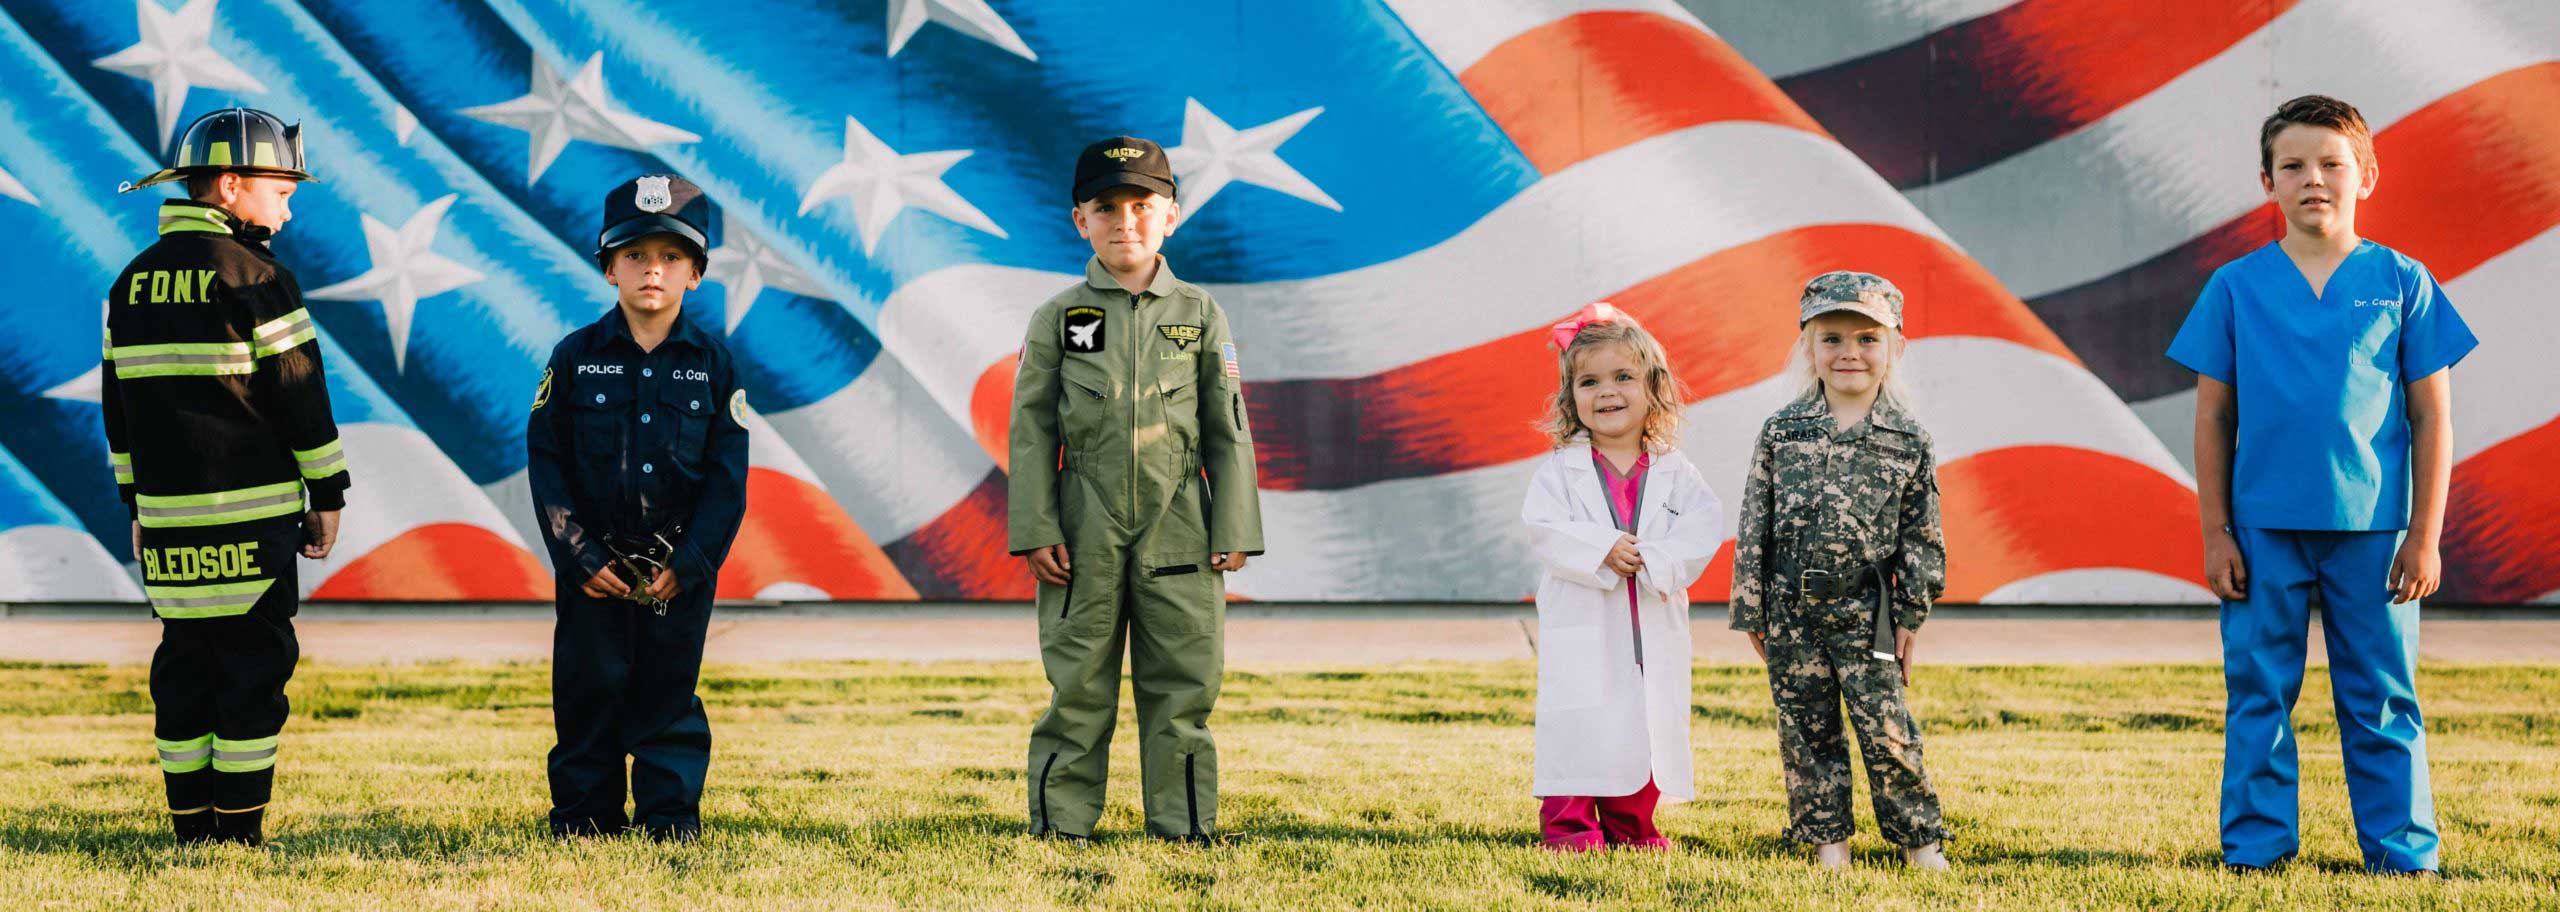 Authentic, Personalized Kid's Costumes: Firefighter, Police & Fighter Pilot